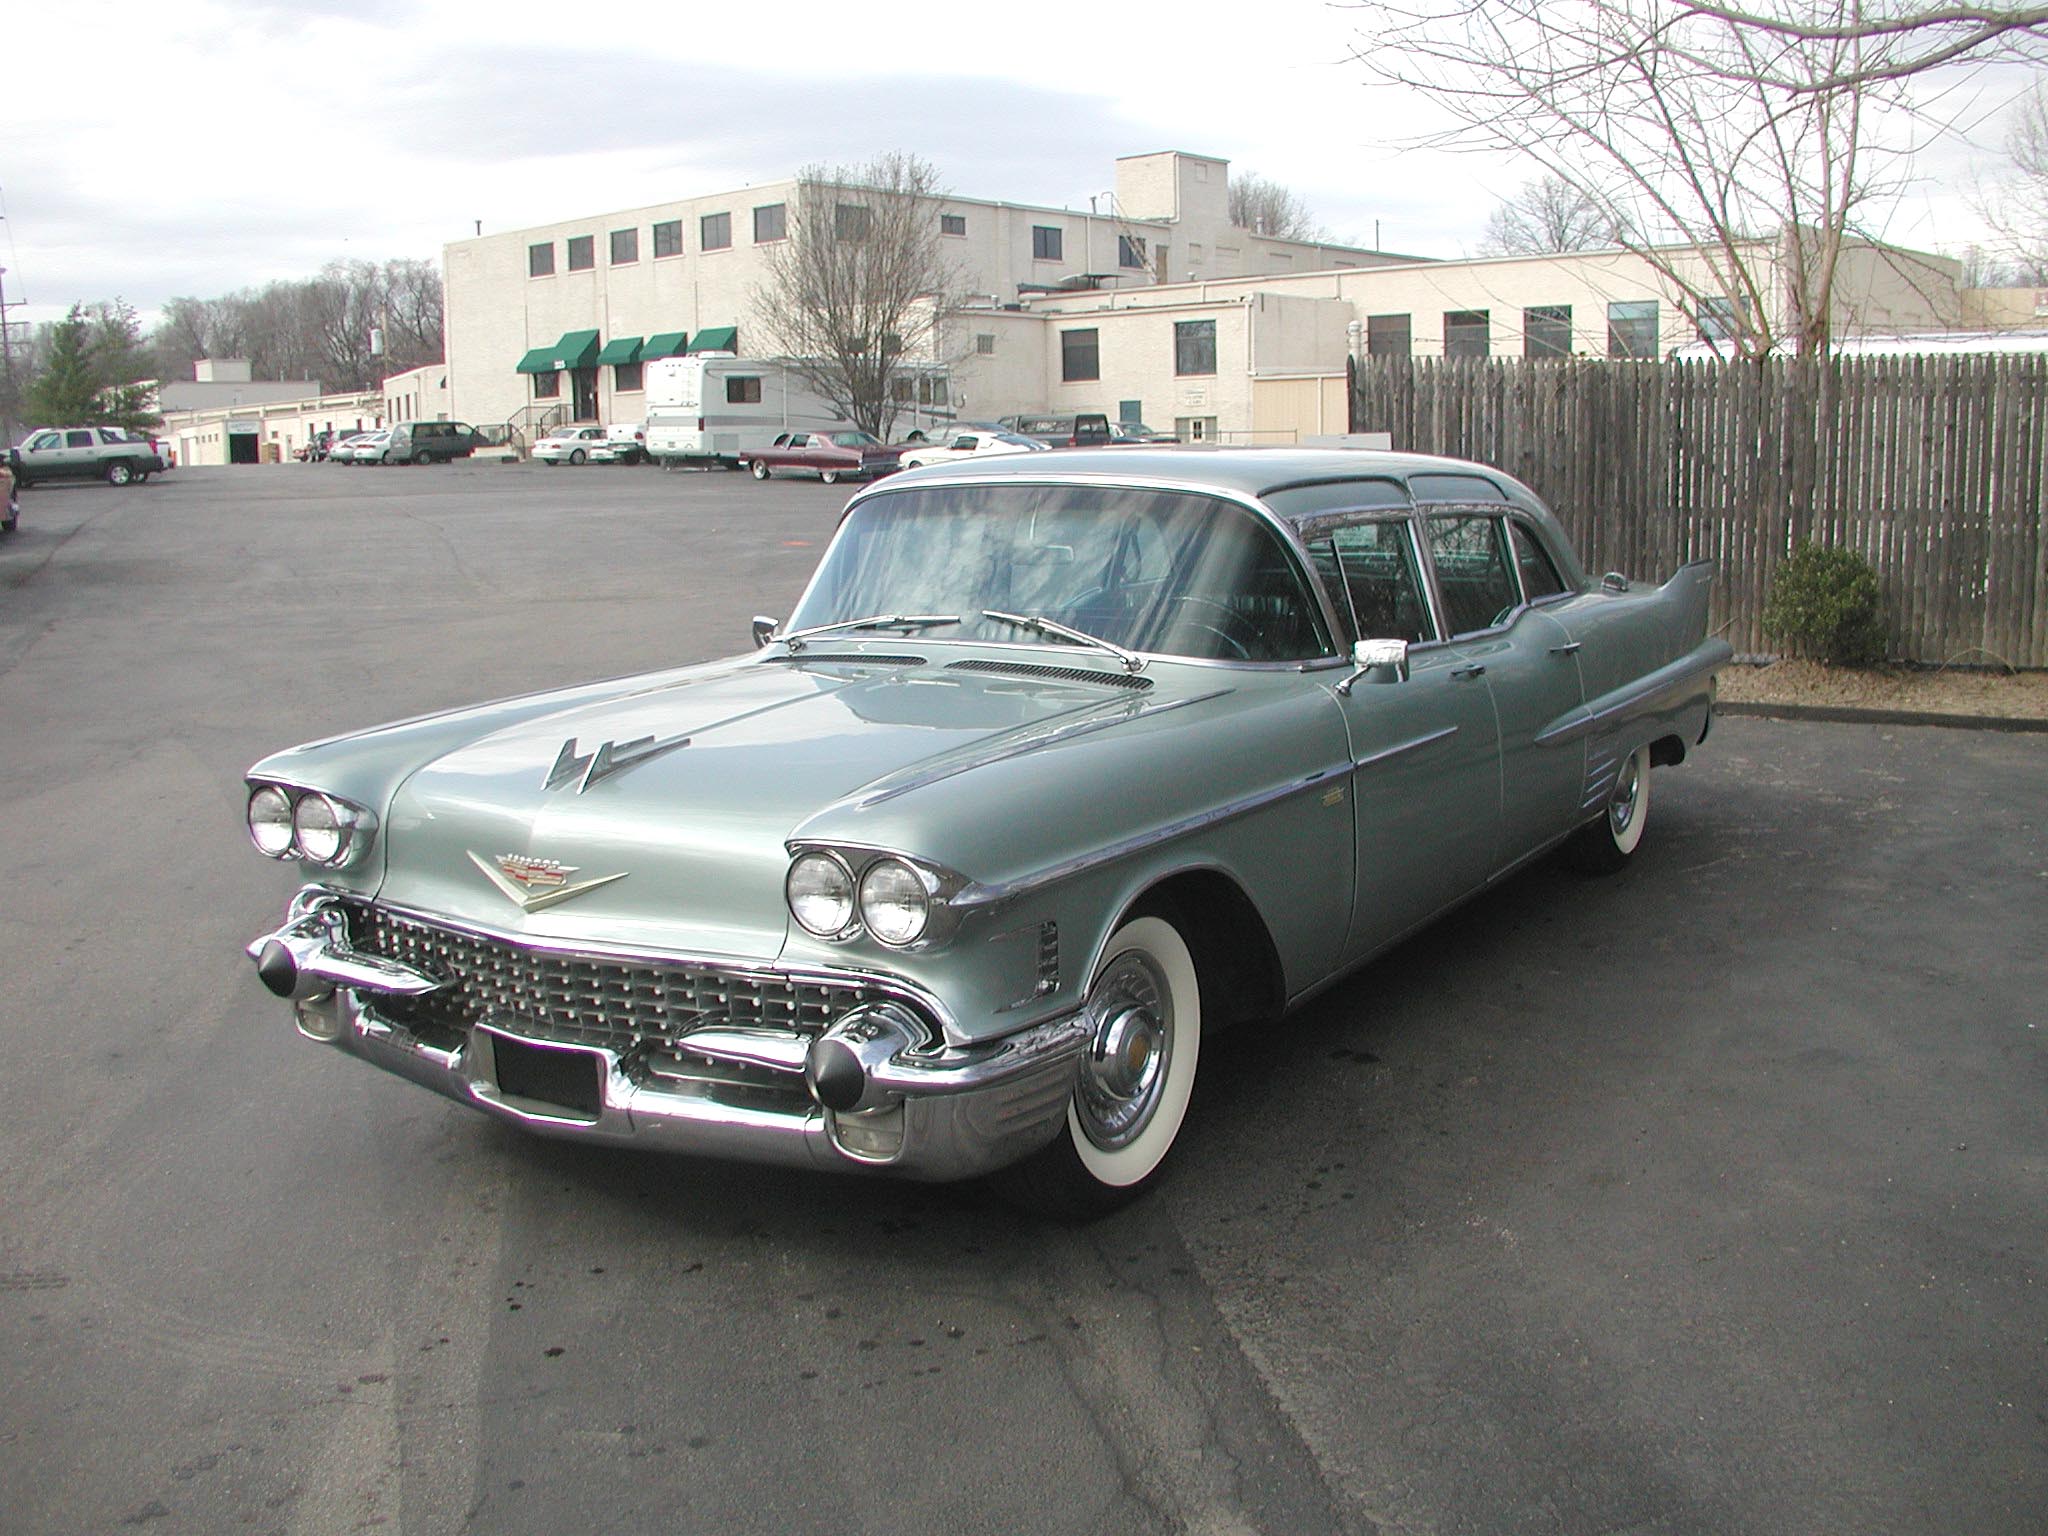 1958 cadillac fleetwood series 75 imperial